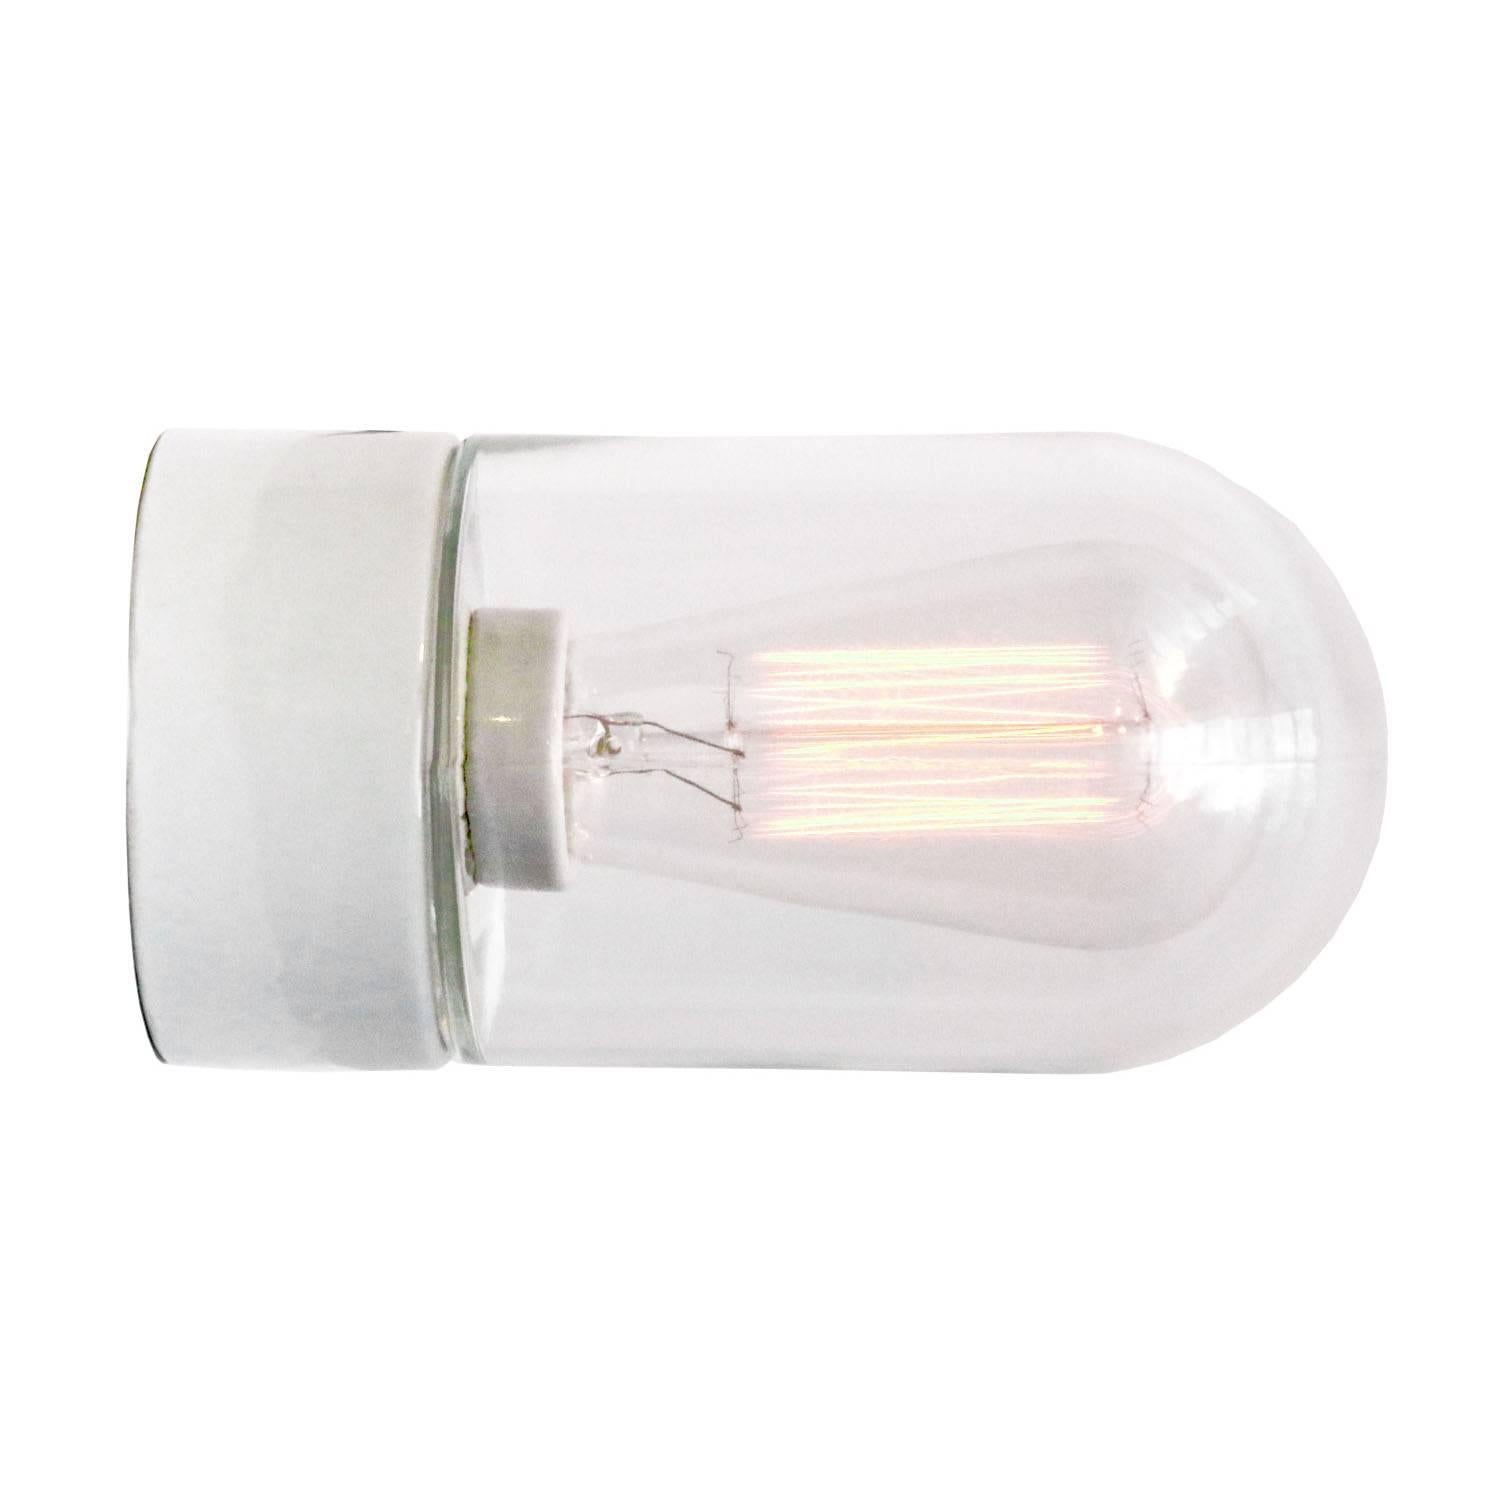 Industrial ceiling lamp. White porcelain. Clear glass.
Two conductors. No ground.

Weight: 0.8 kg / 1.8 lb

Priced per individual item. All lamps have been made suitable by international standards for incandescent light bulbs, energy-efficient and